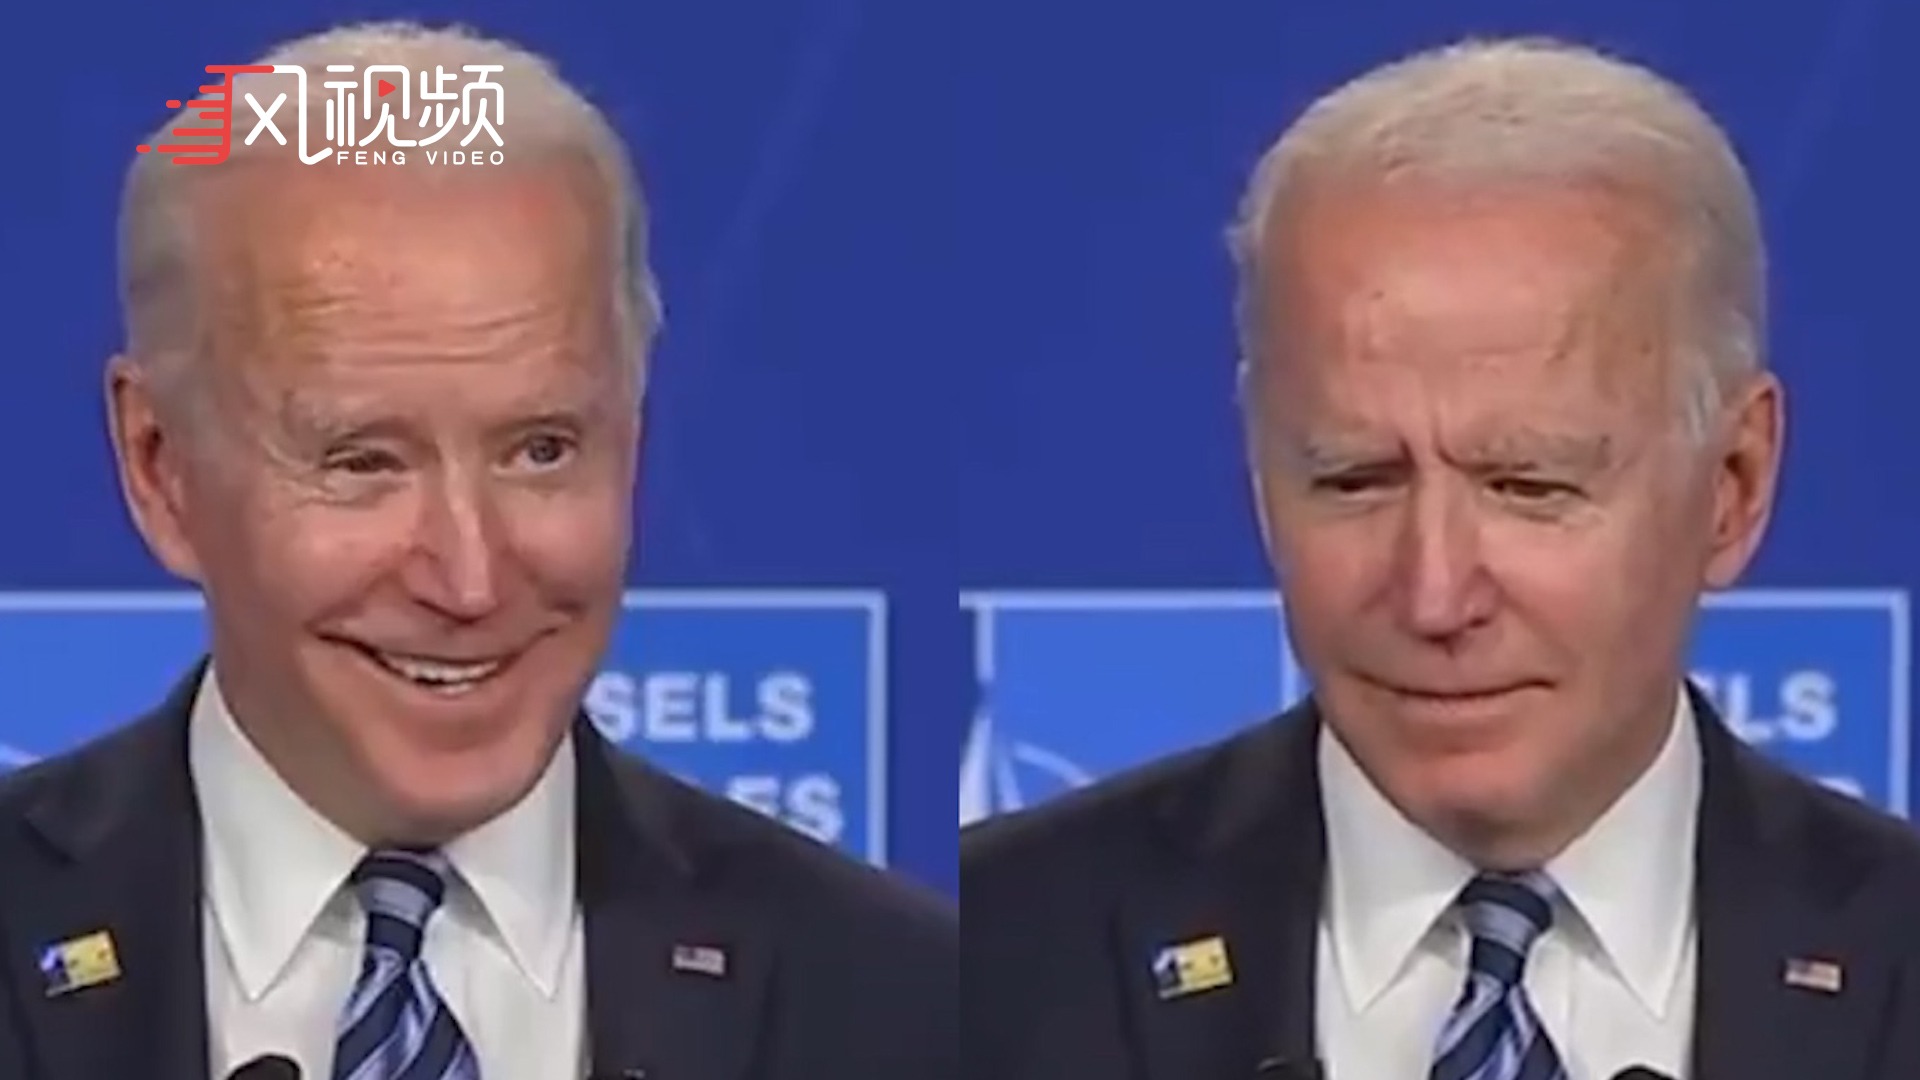 Biden: Trump uses "everything as a dog whistle to try to generate ...